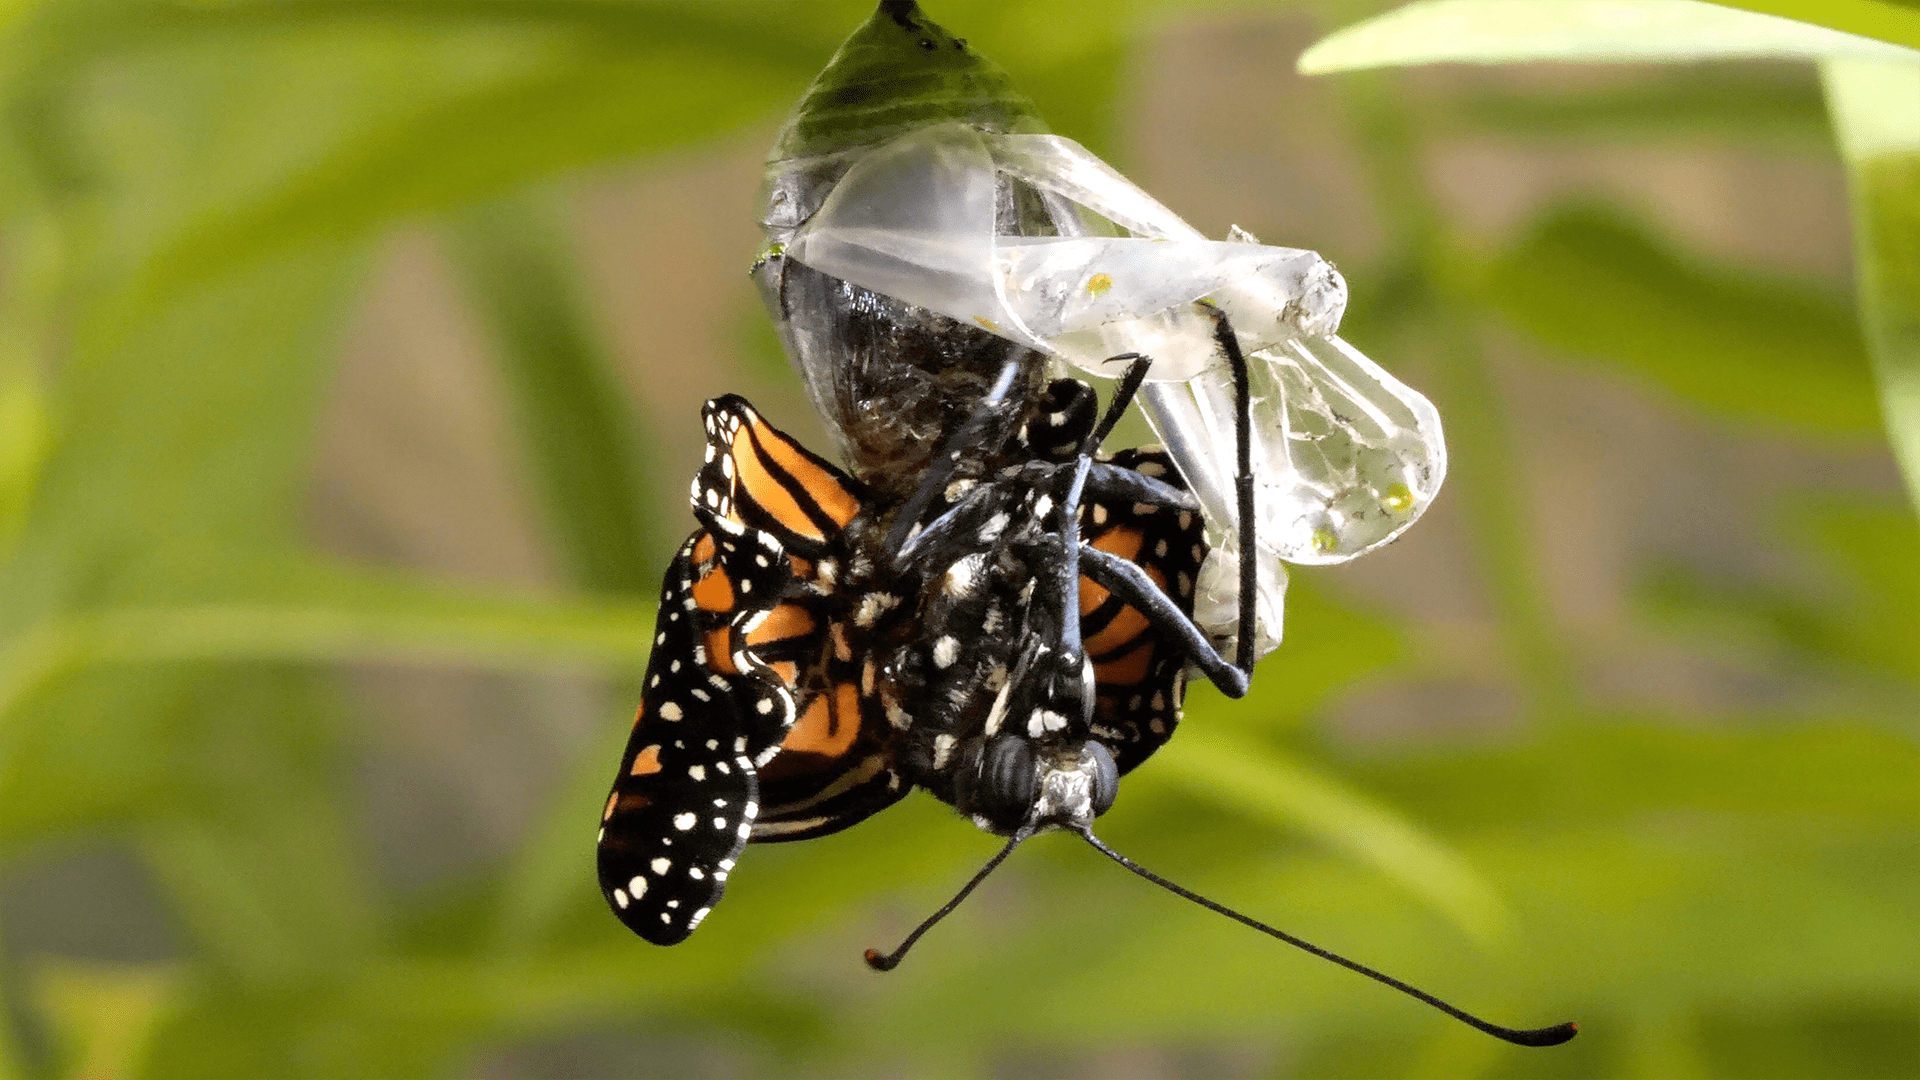 Deep　Nasty　14　Season　Butterfly　Ruining　Parasite　Look　Episode　Is　Wings　Monarch　This　PBS